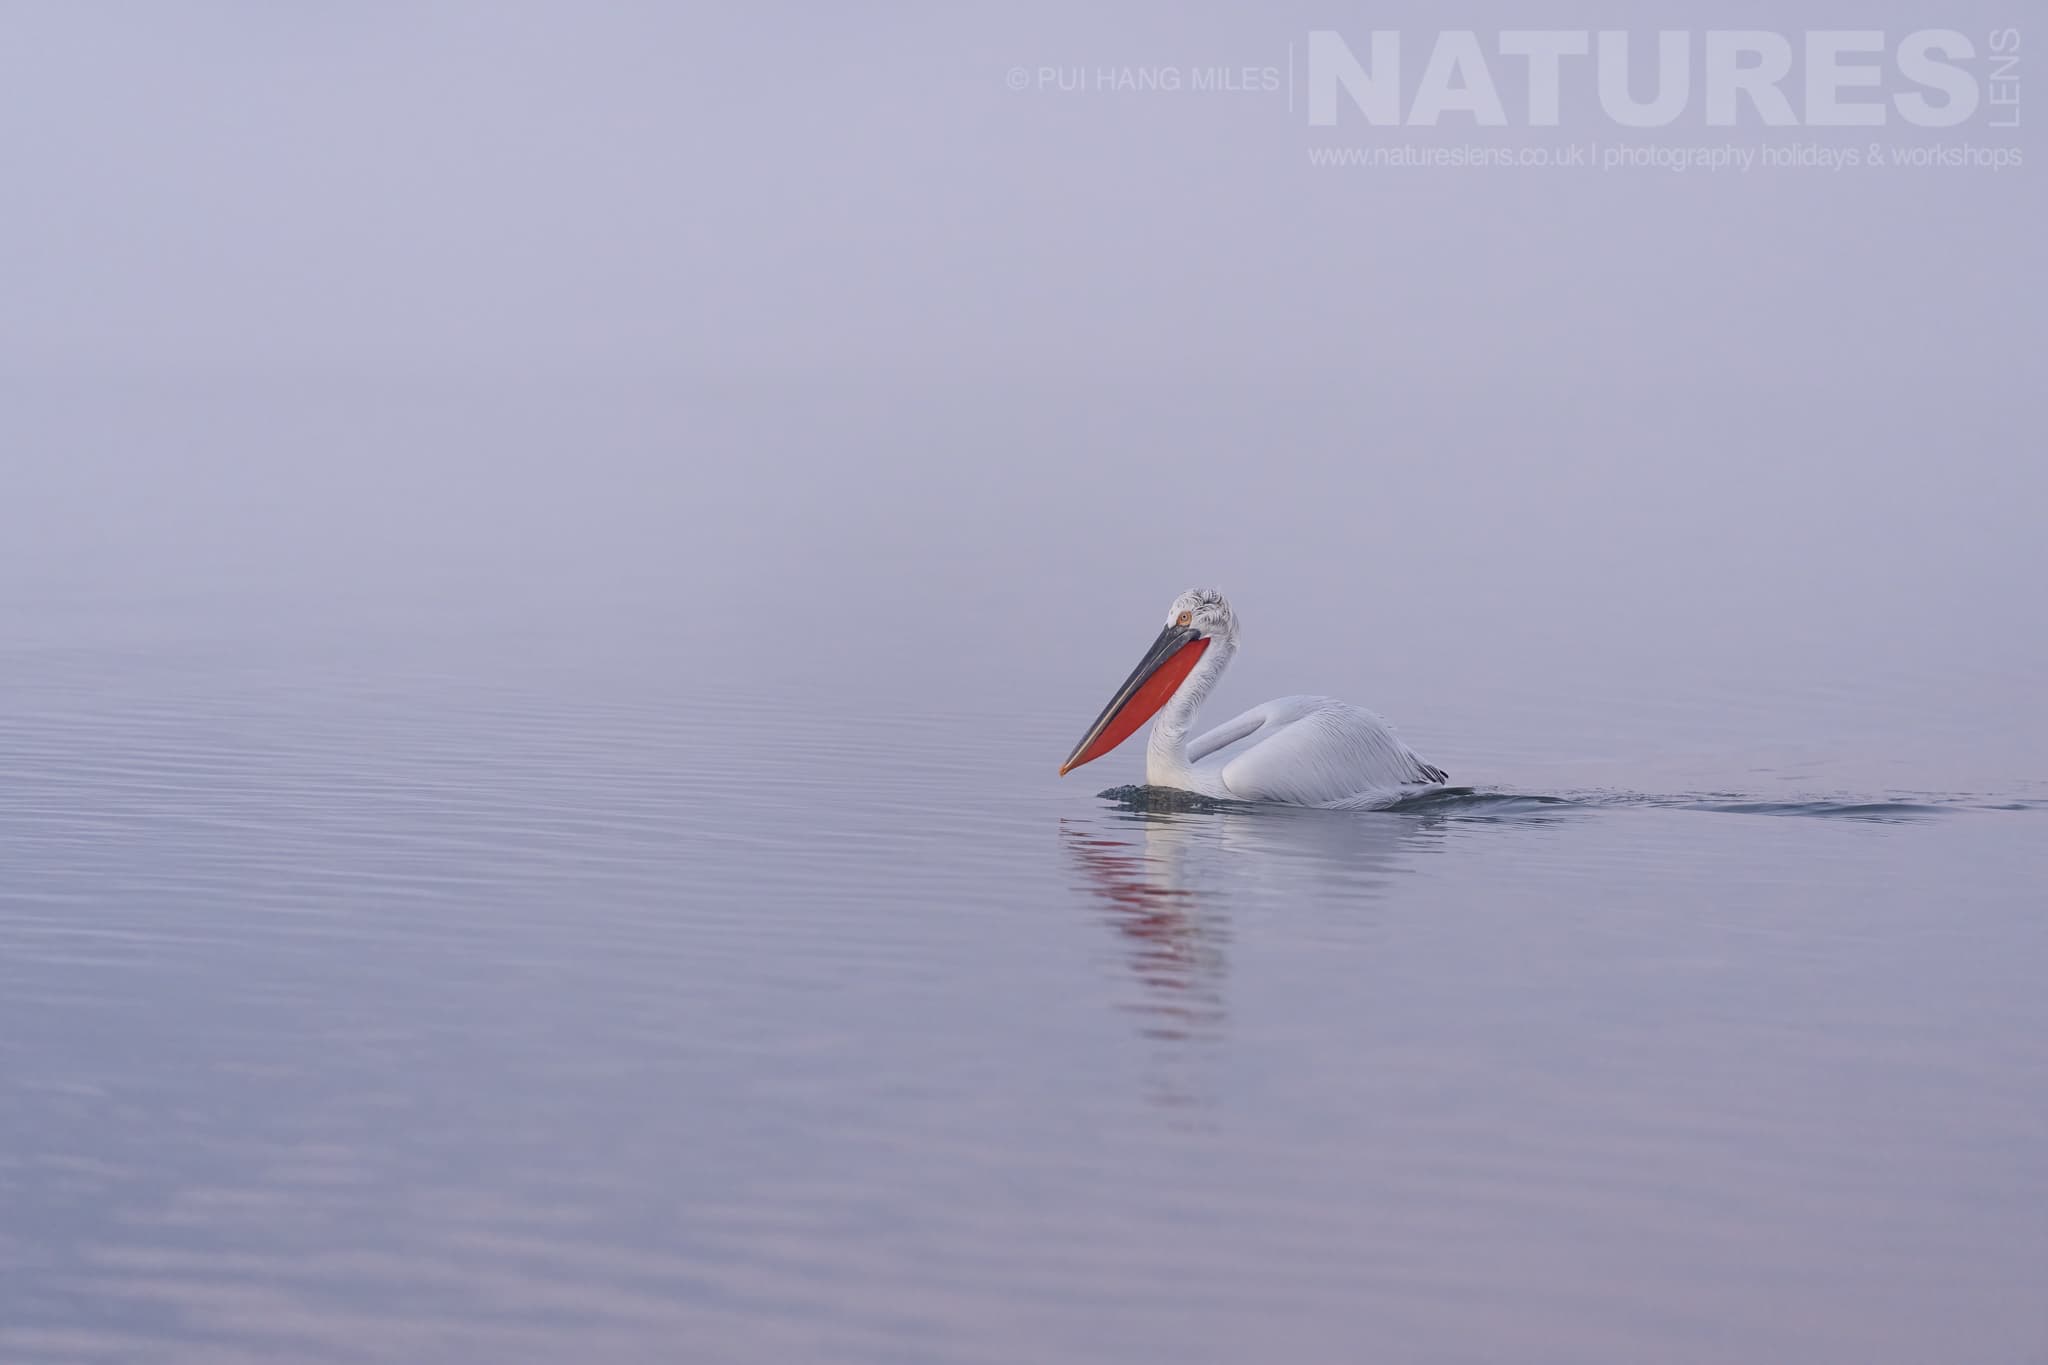 A Lone Pelican Of Lake Kerkini Drifting On Serene Waters Photographed During A Natureslens Pelicans Of Lake Kerkini Photography Holiday